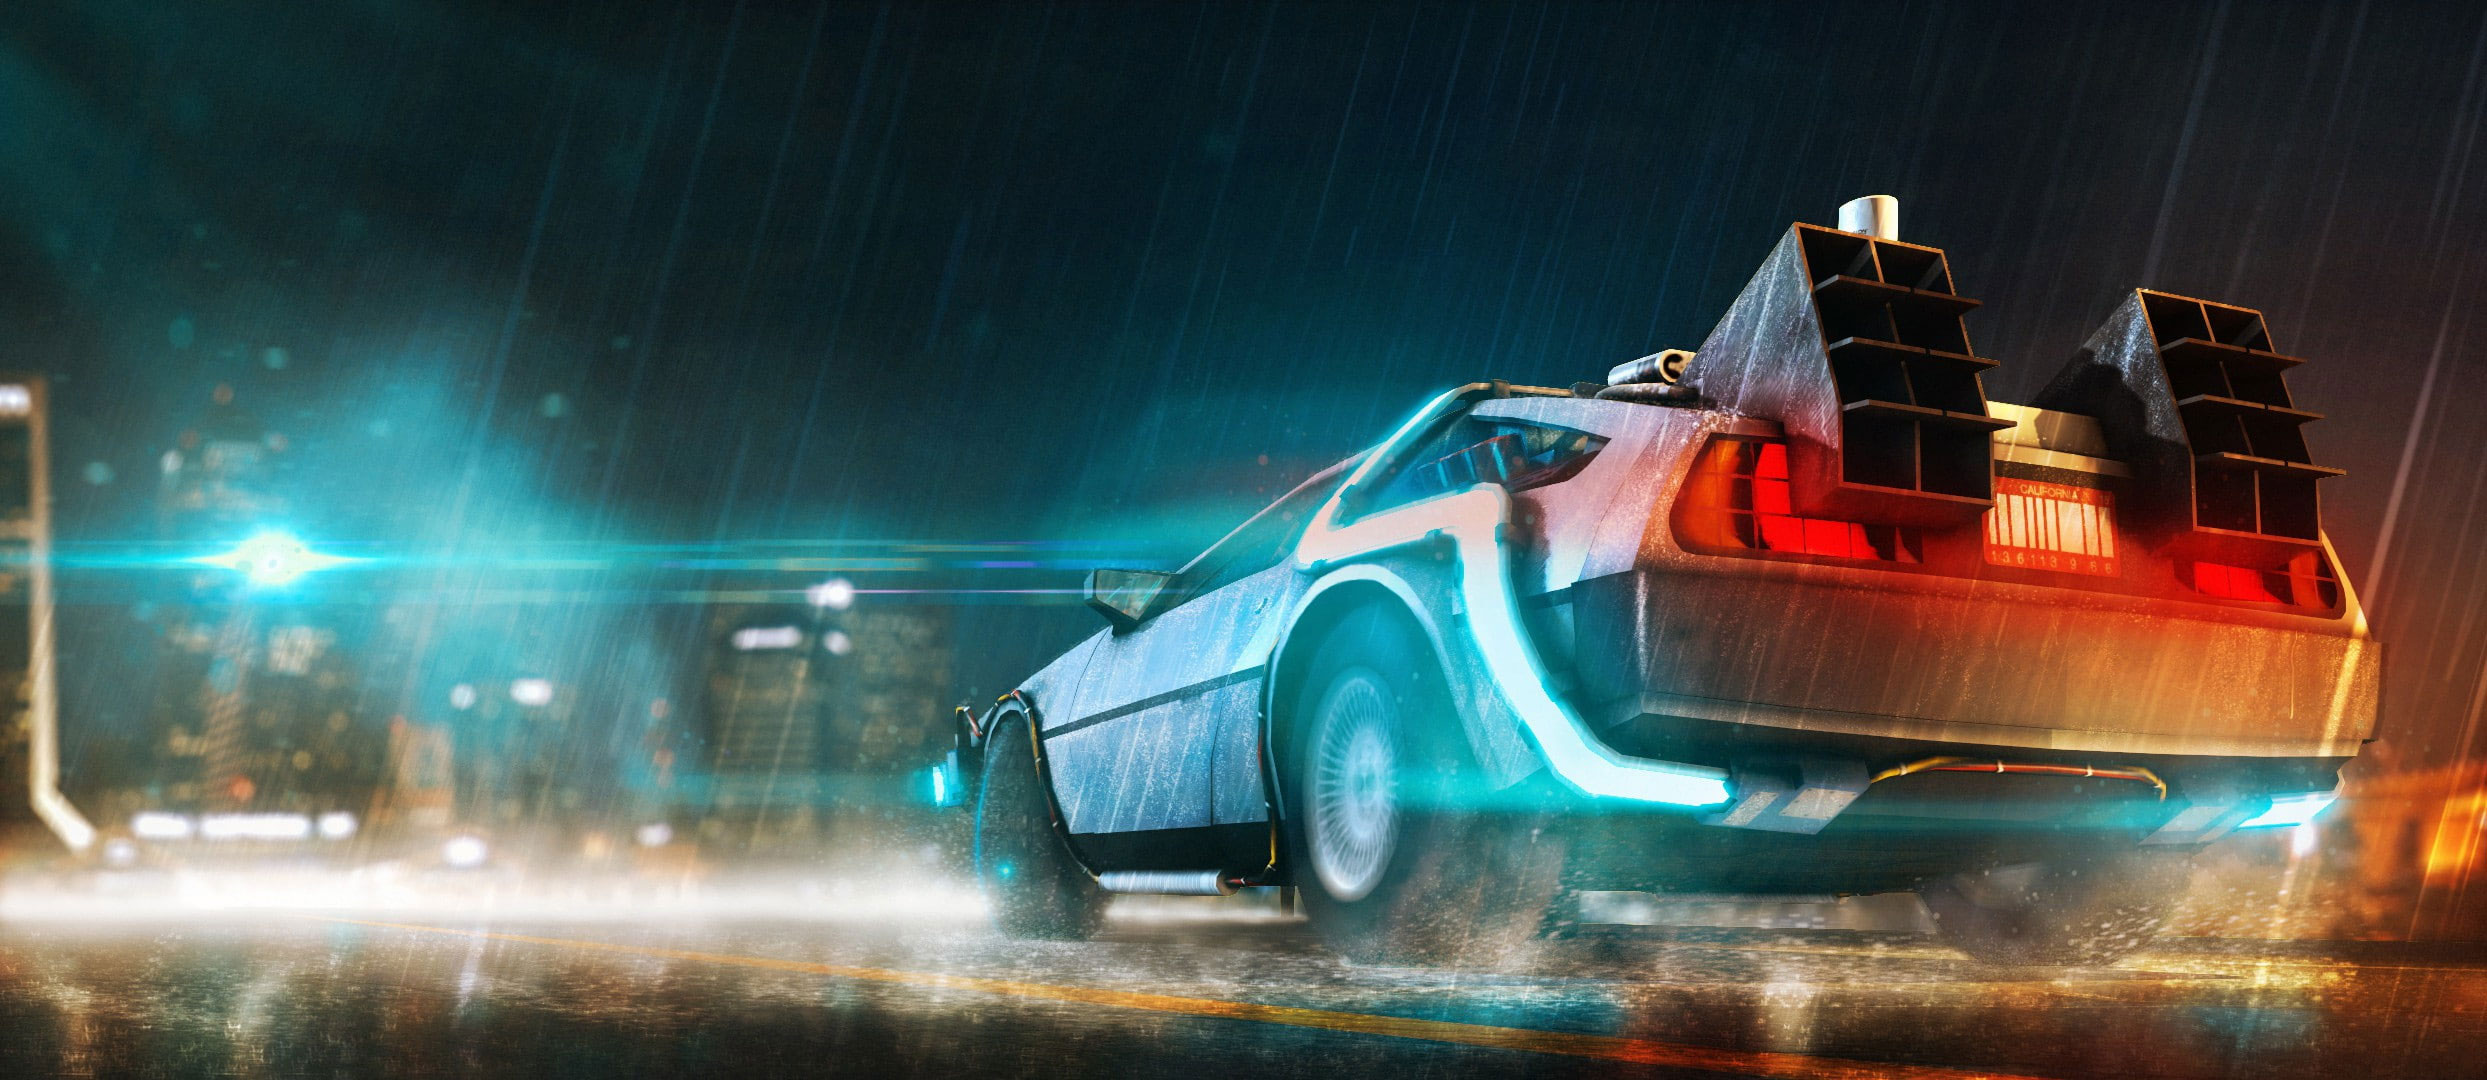 Wallpaper Back To The Future, Movie